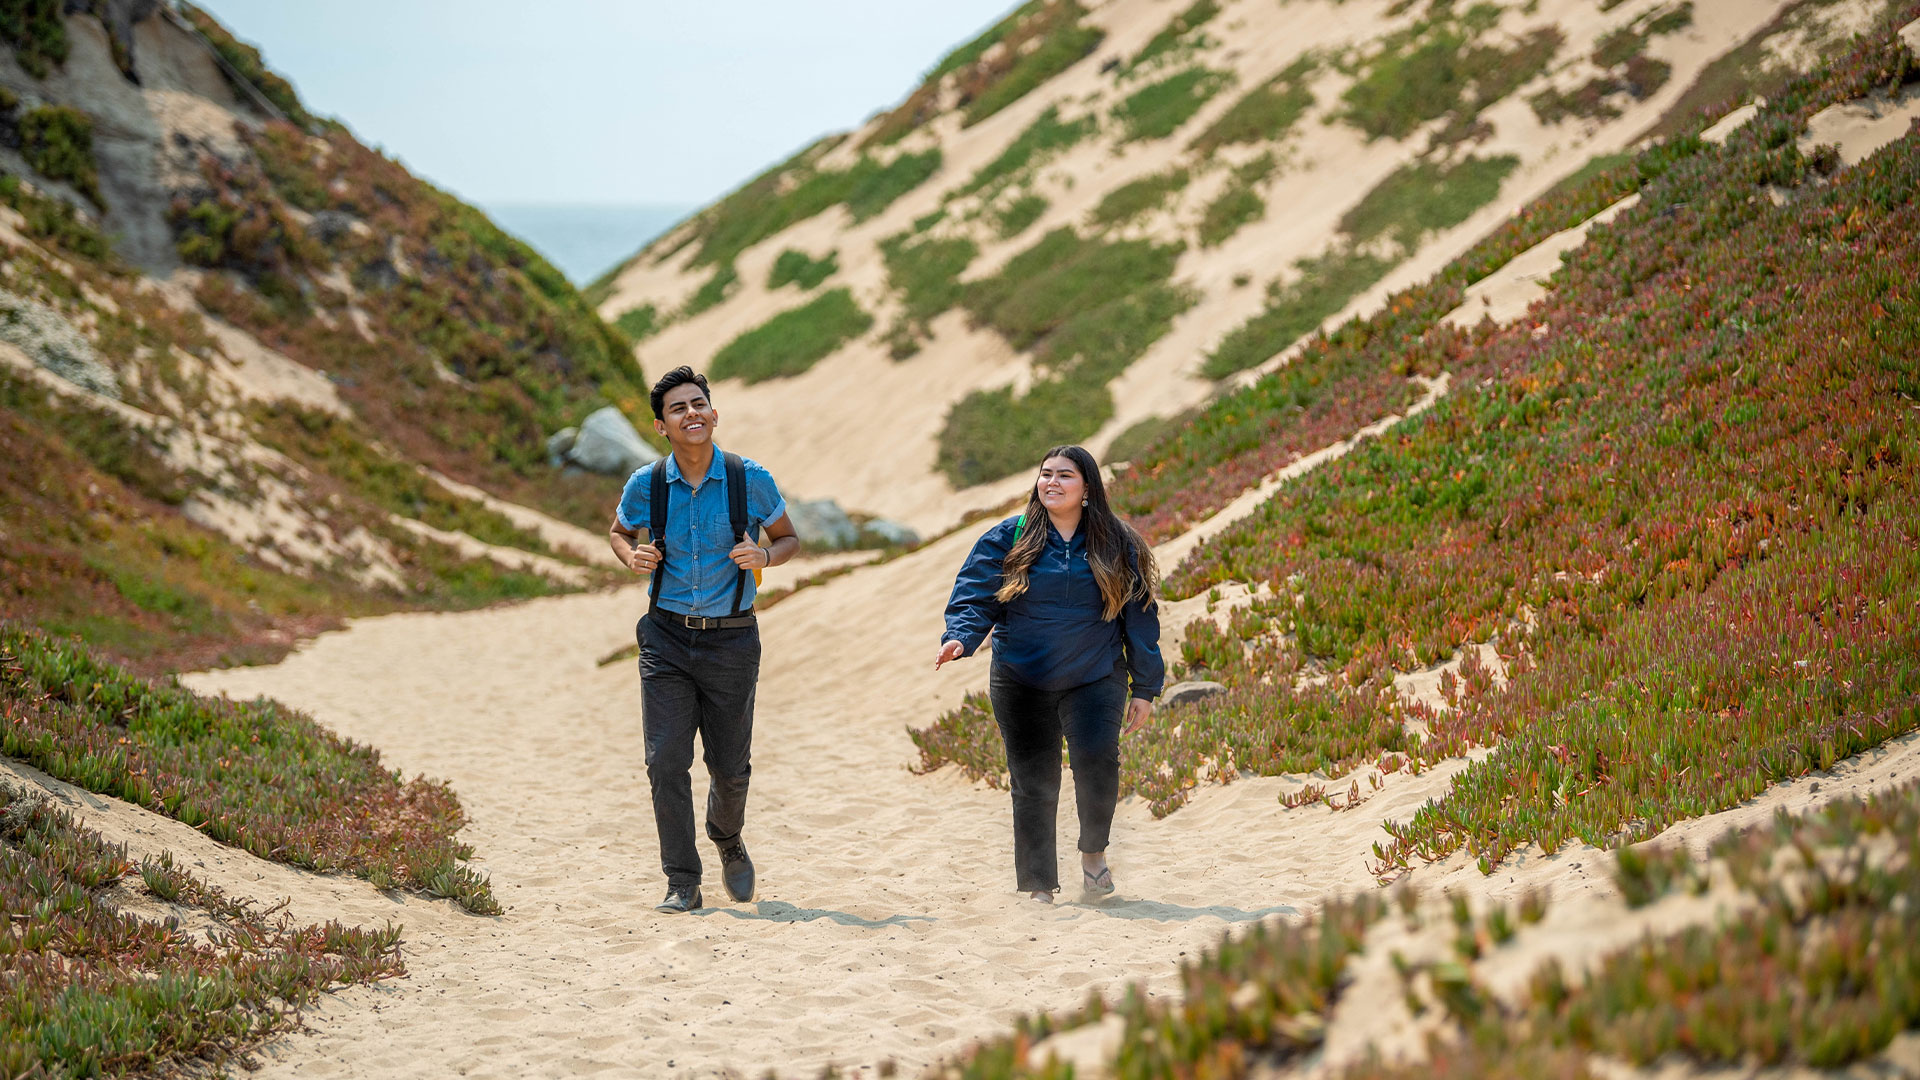 Photo: Students strolling through the Fort Ord dunes by the beach